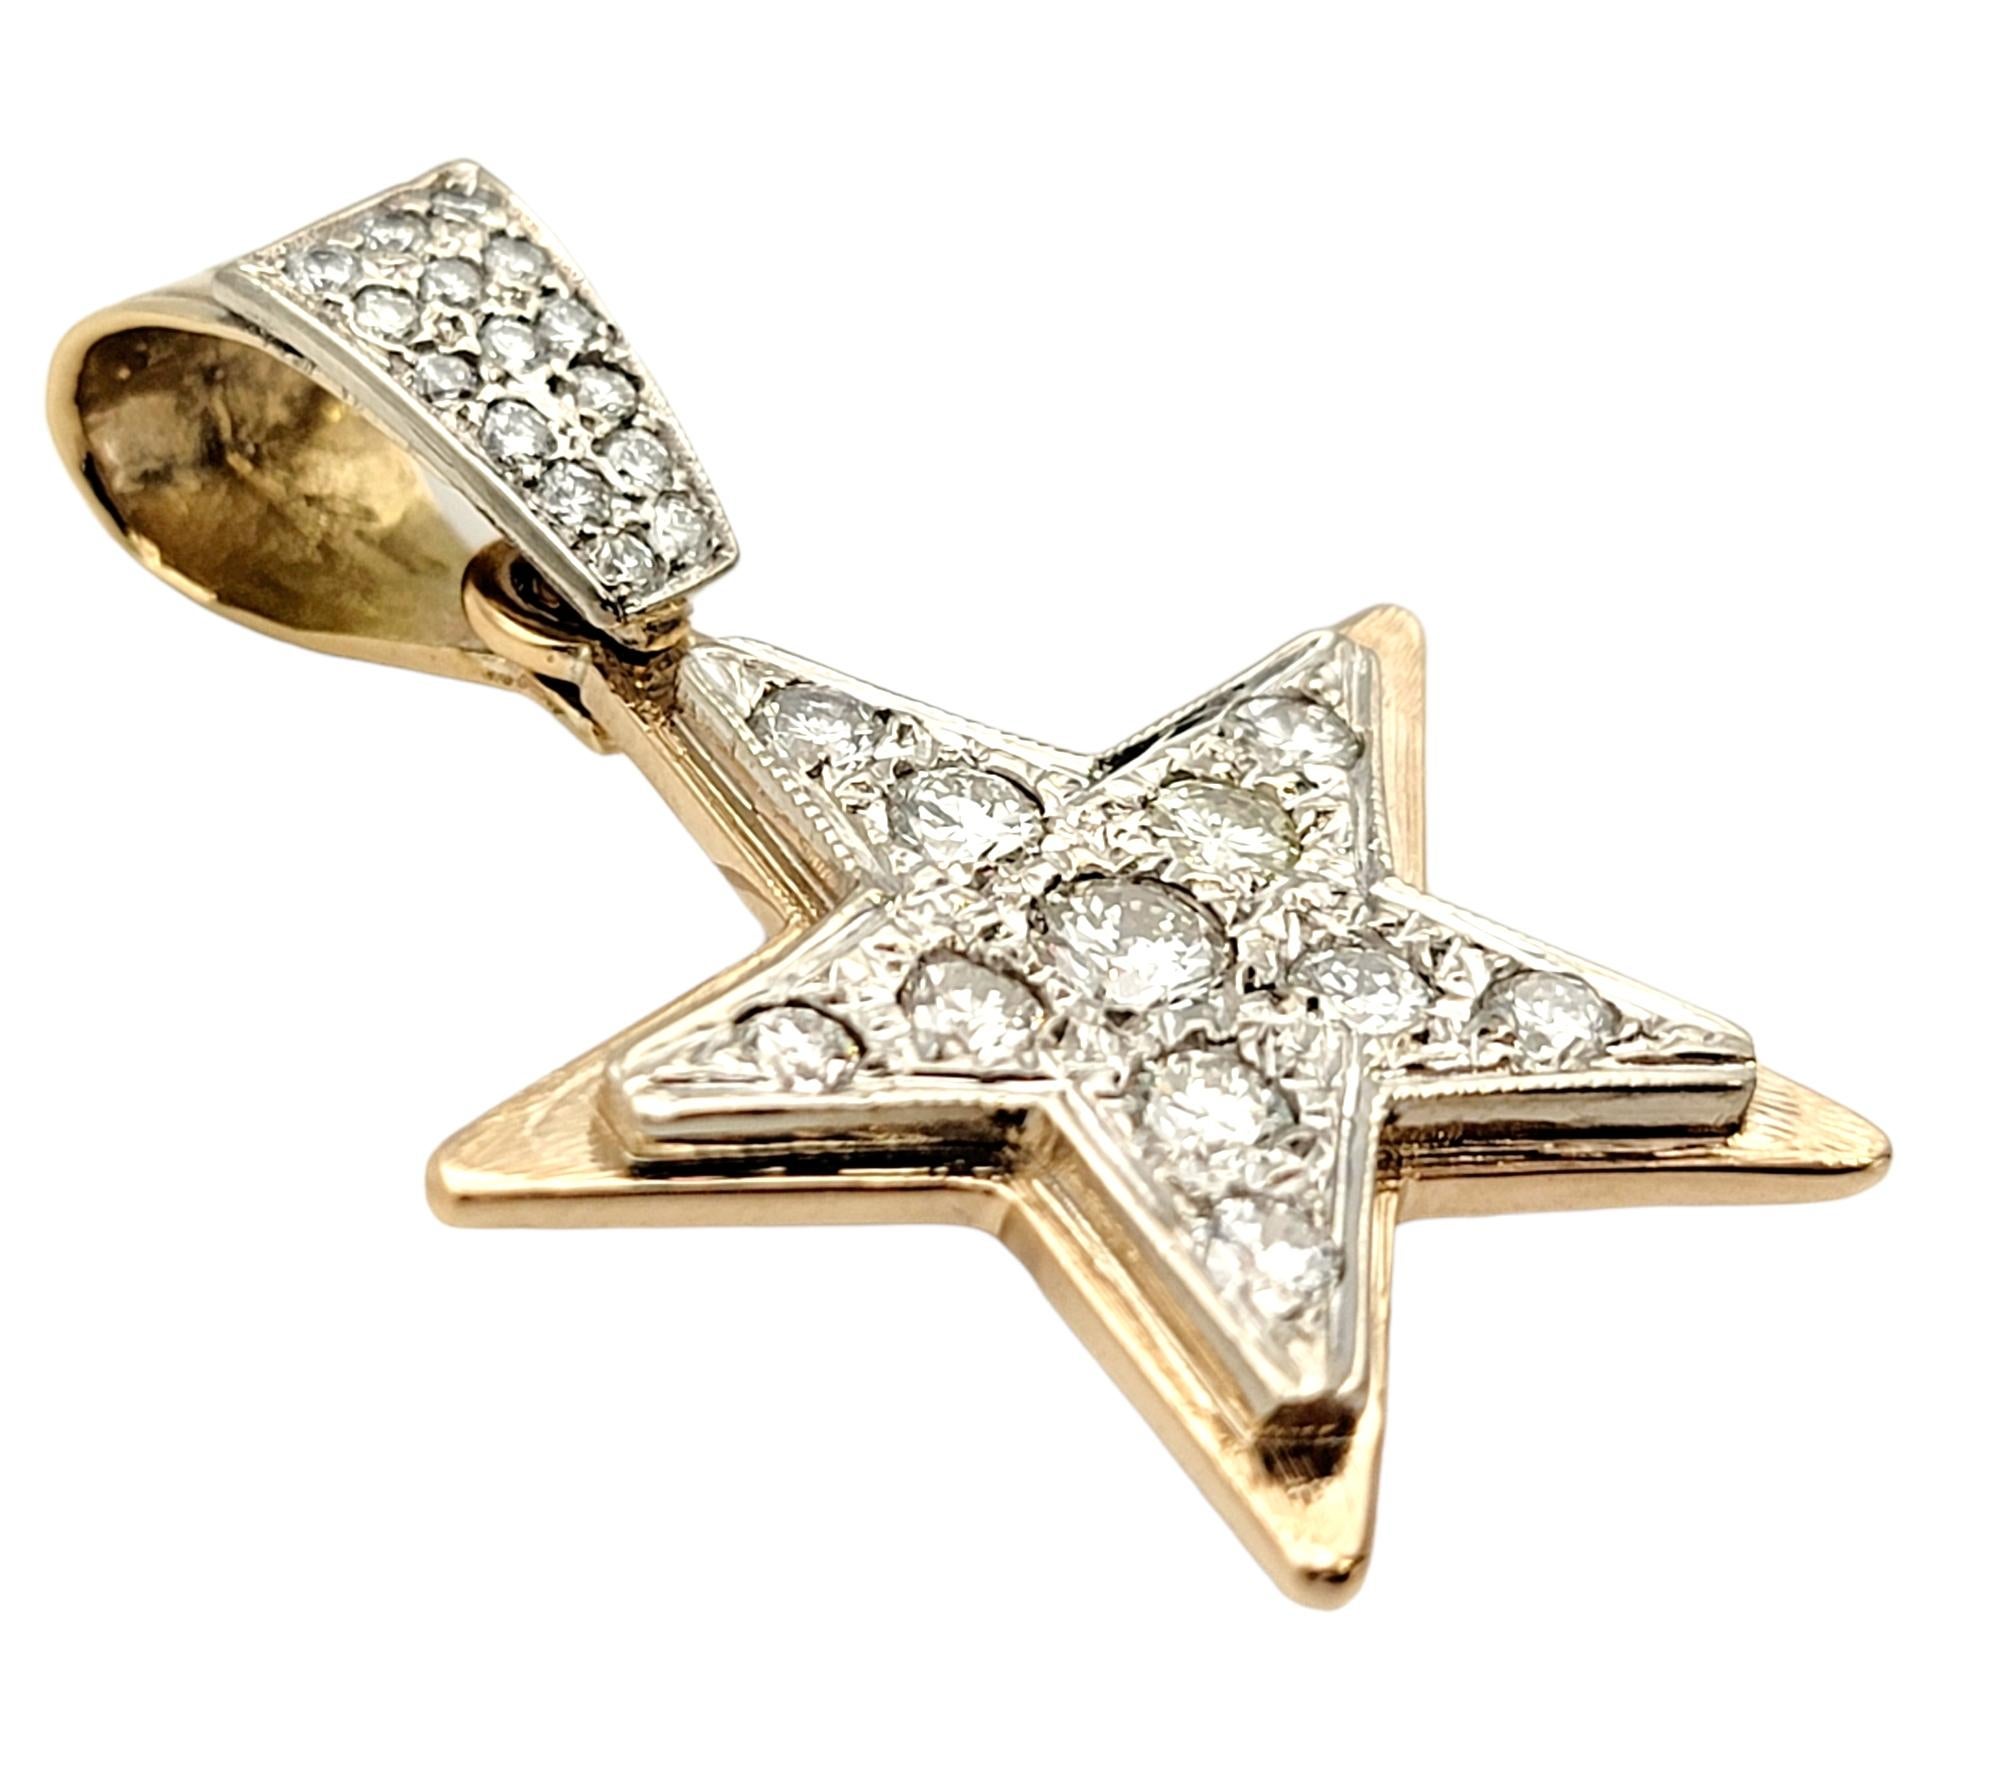 Bright and beautiful star pendant embellished with shimmering natural diamonds. The warm yellow gold setting adds a nice touch of contrast while the white gold really enhances the white brilliance of the diamonds. The perfect 5 point shape makes a